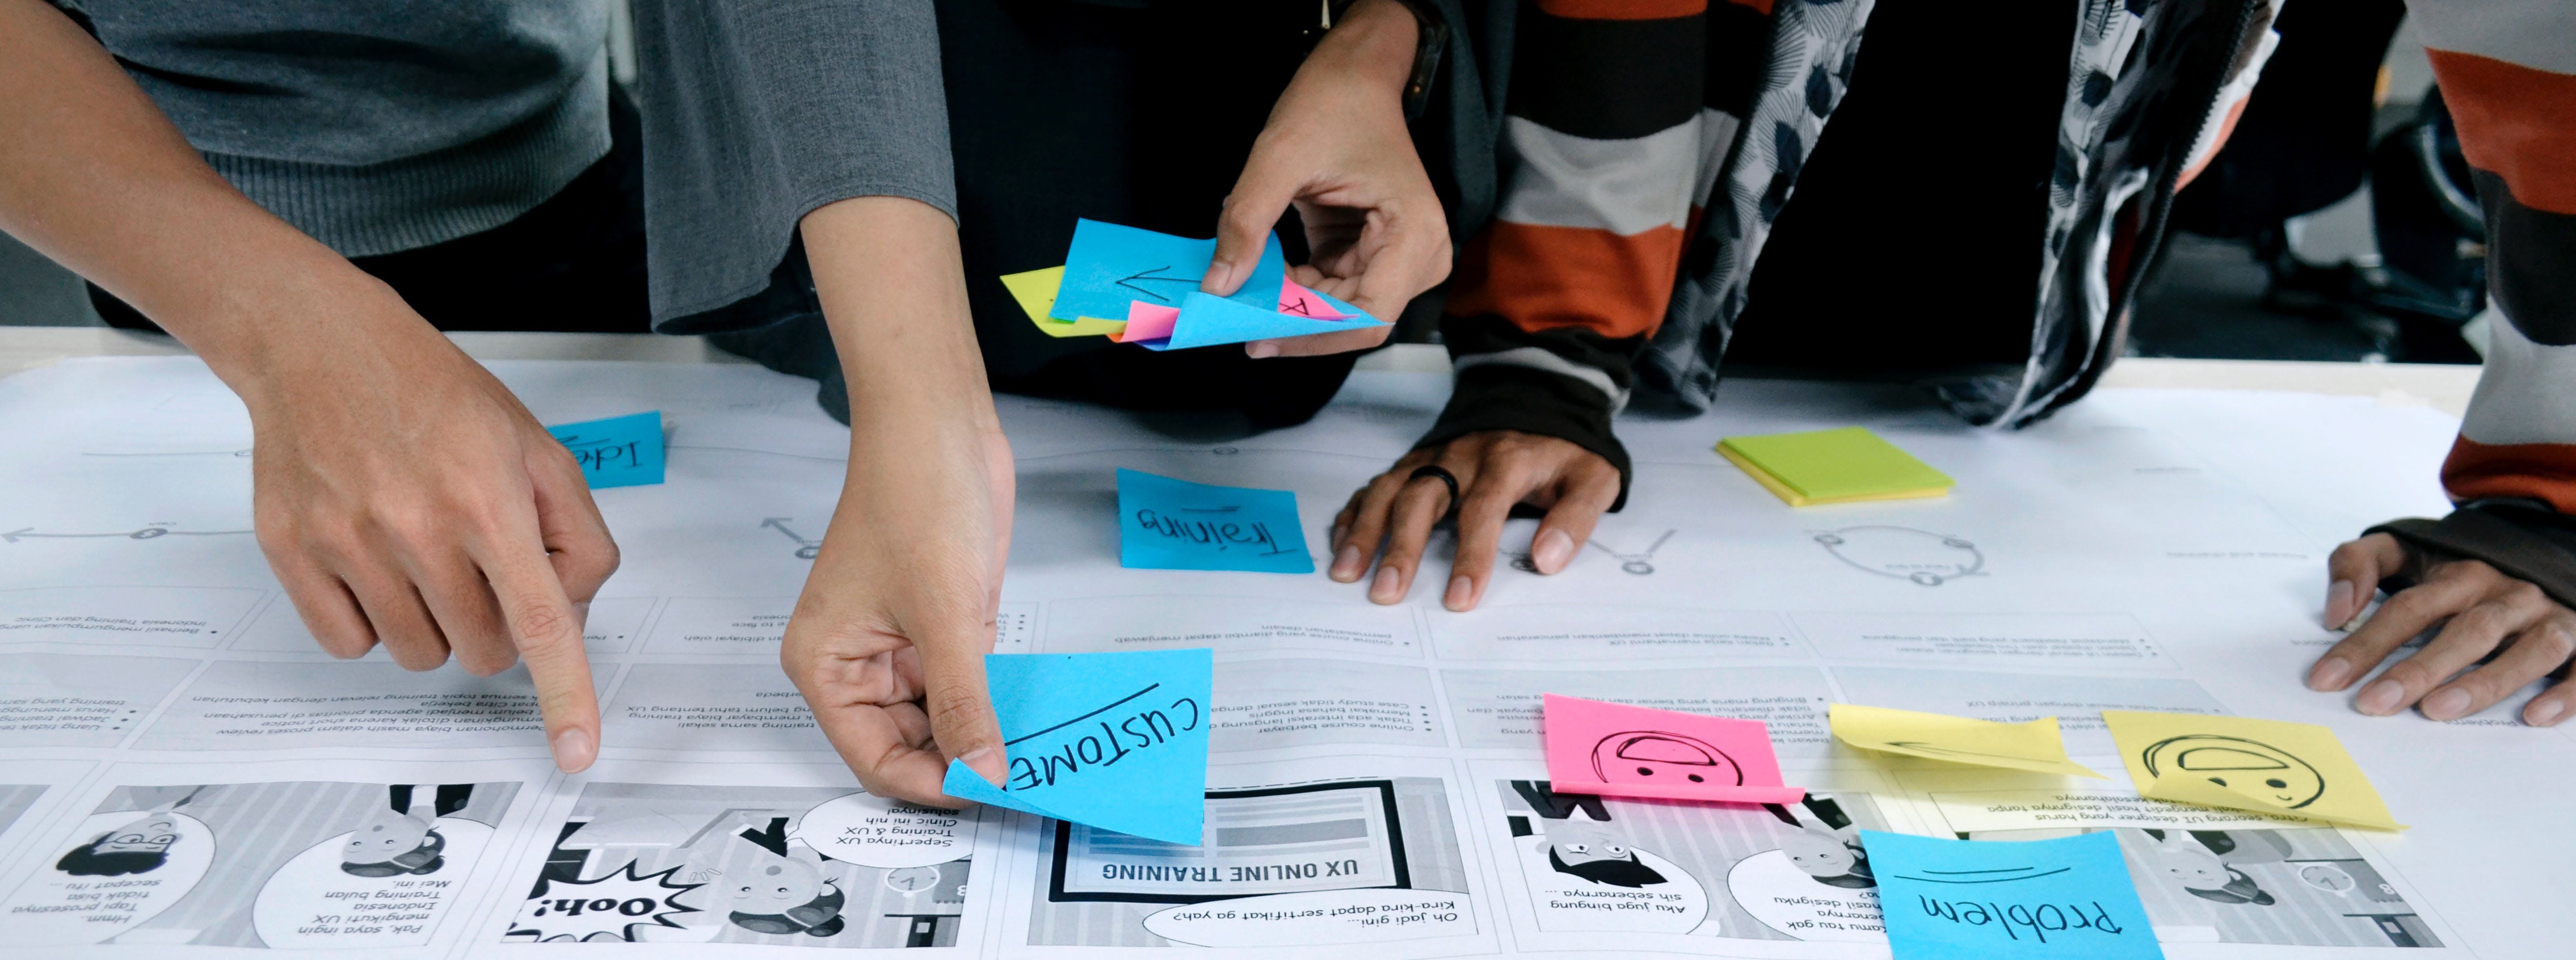 Three people lean over a table covered with printed sheets of paper. One person is holding a stack of sticky notes in one hand while placing a sticky note on one of the pages on the table. A few sticky notes with smiley faces and words are already placed on other pages. 